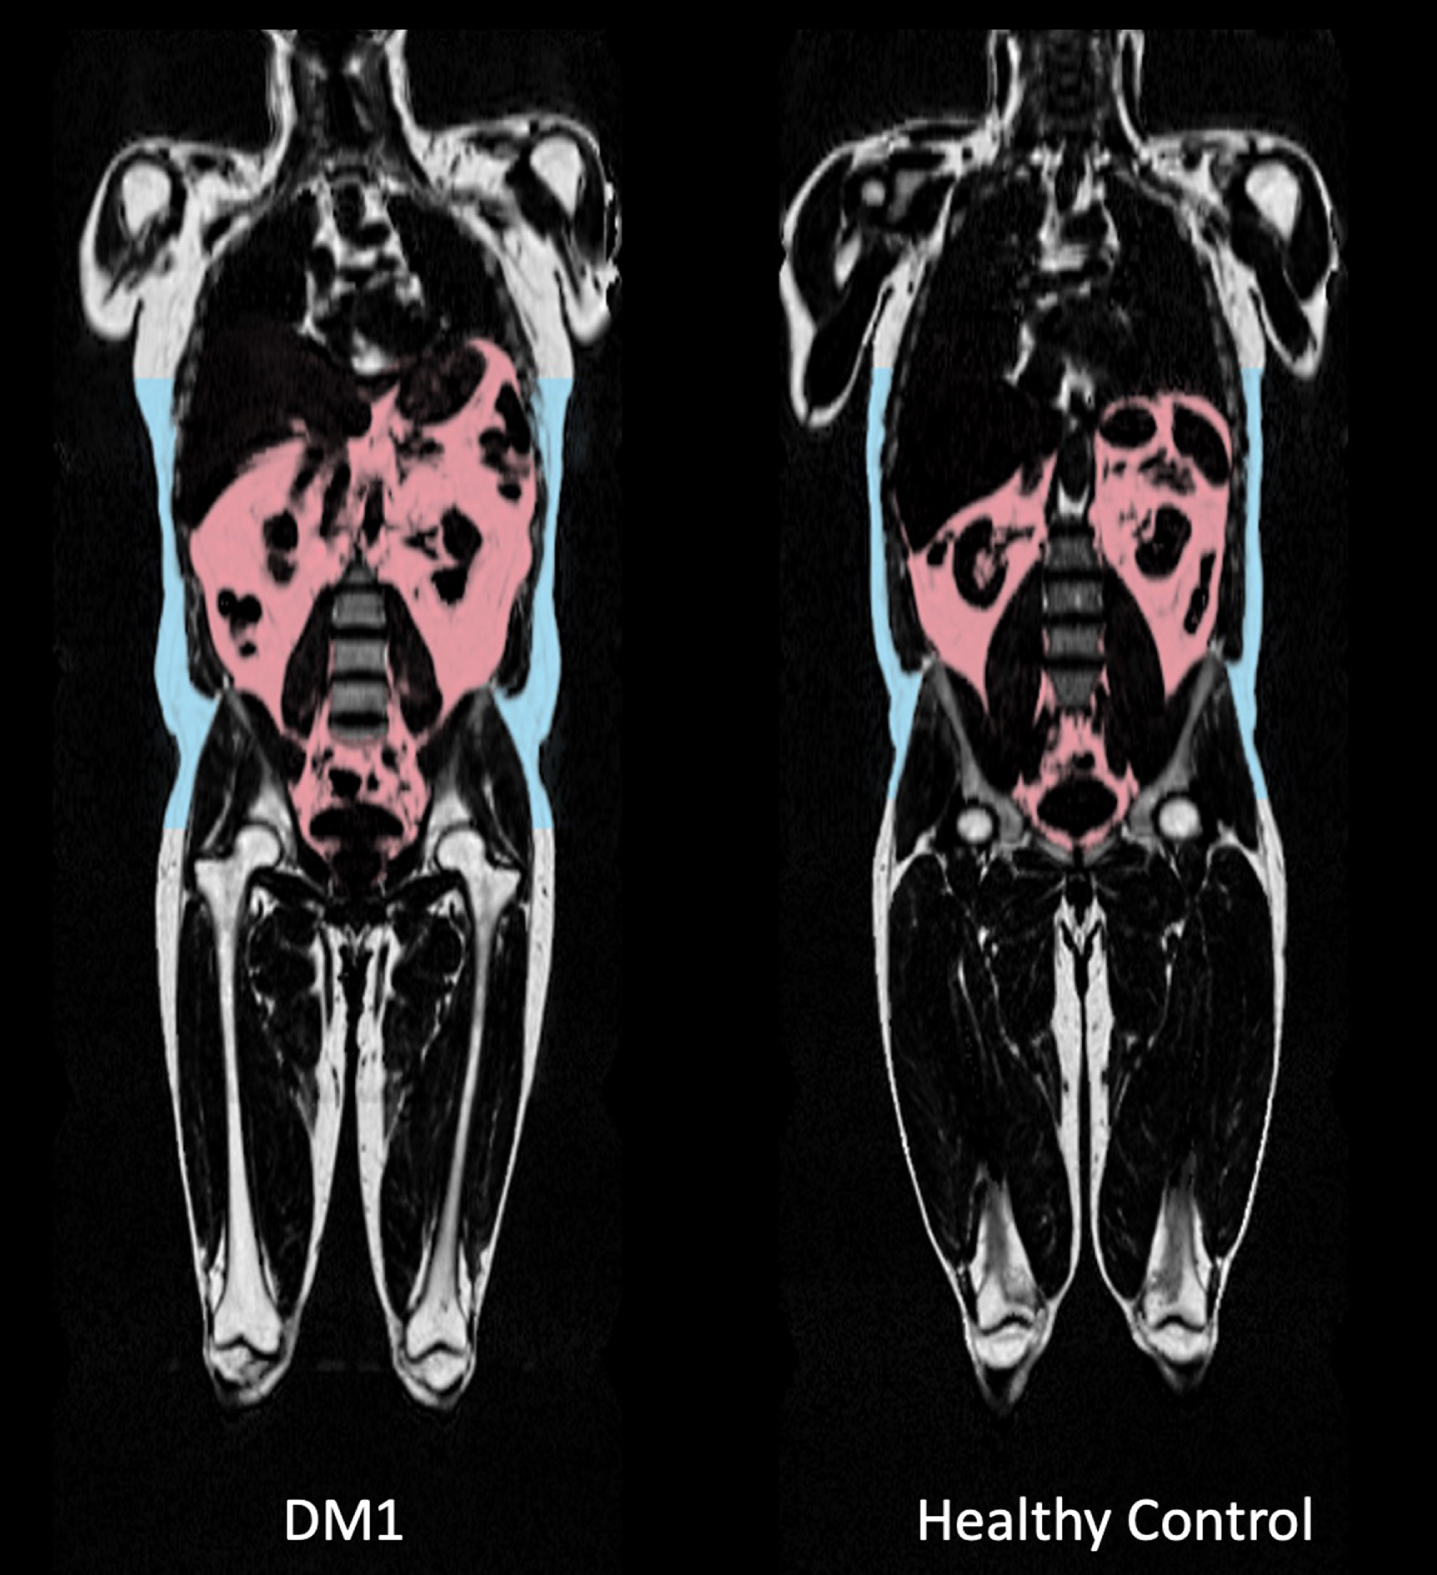 Comparison of full body MRI images between a myotonic dystrophy type 1 (DM1) patient and a healthy age-, sex- and BMI-matched control. Visceral adipose tissue (VAT) deposition is highlighted in pink. VAT volume was 5,59L in the displayed DM1 patient versus 4,28 L in the healthy matched control. Subcutaneous fat deposition is highlighted in blue, as part of the total adipose tissue volume. Also note the difference in shoulder and leg musculature: thigh lean muscle volume was 11,1 L in the DM1 patient versus 15,1 L in the healthy control, as part of total lean tissue volume.